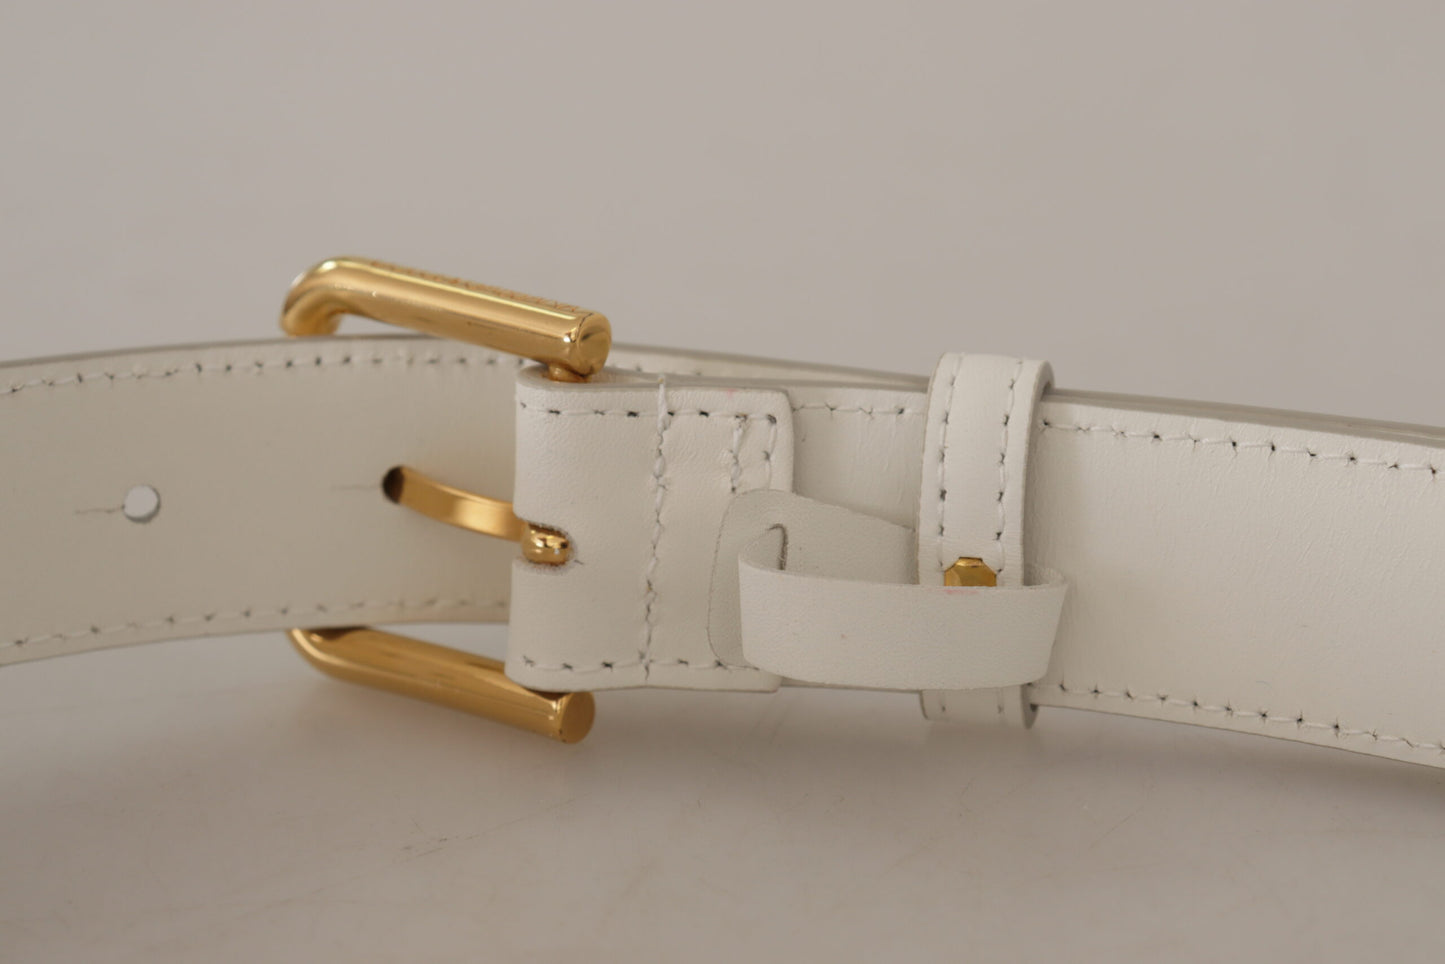 Chic White Leather Belt with Gold Engraved Buckle